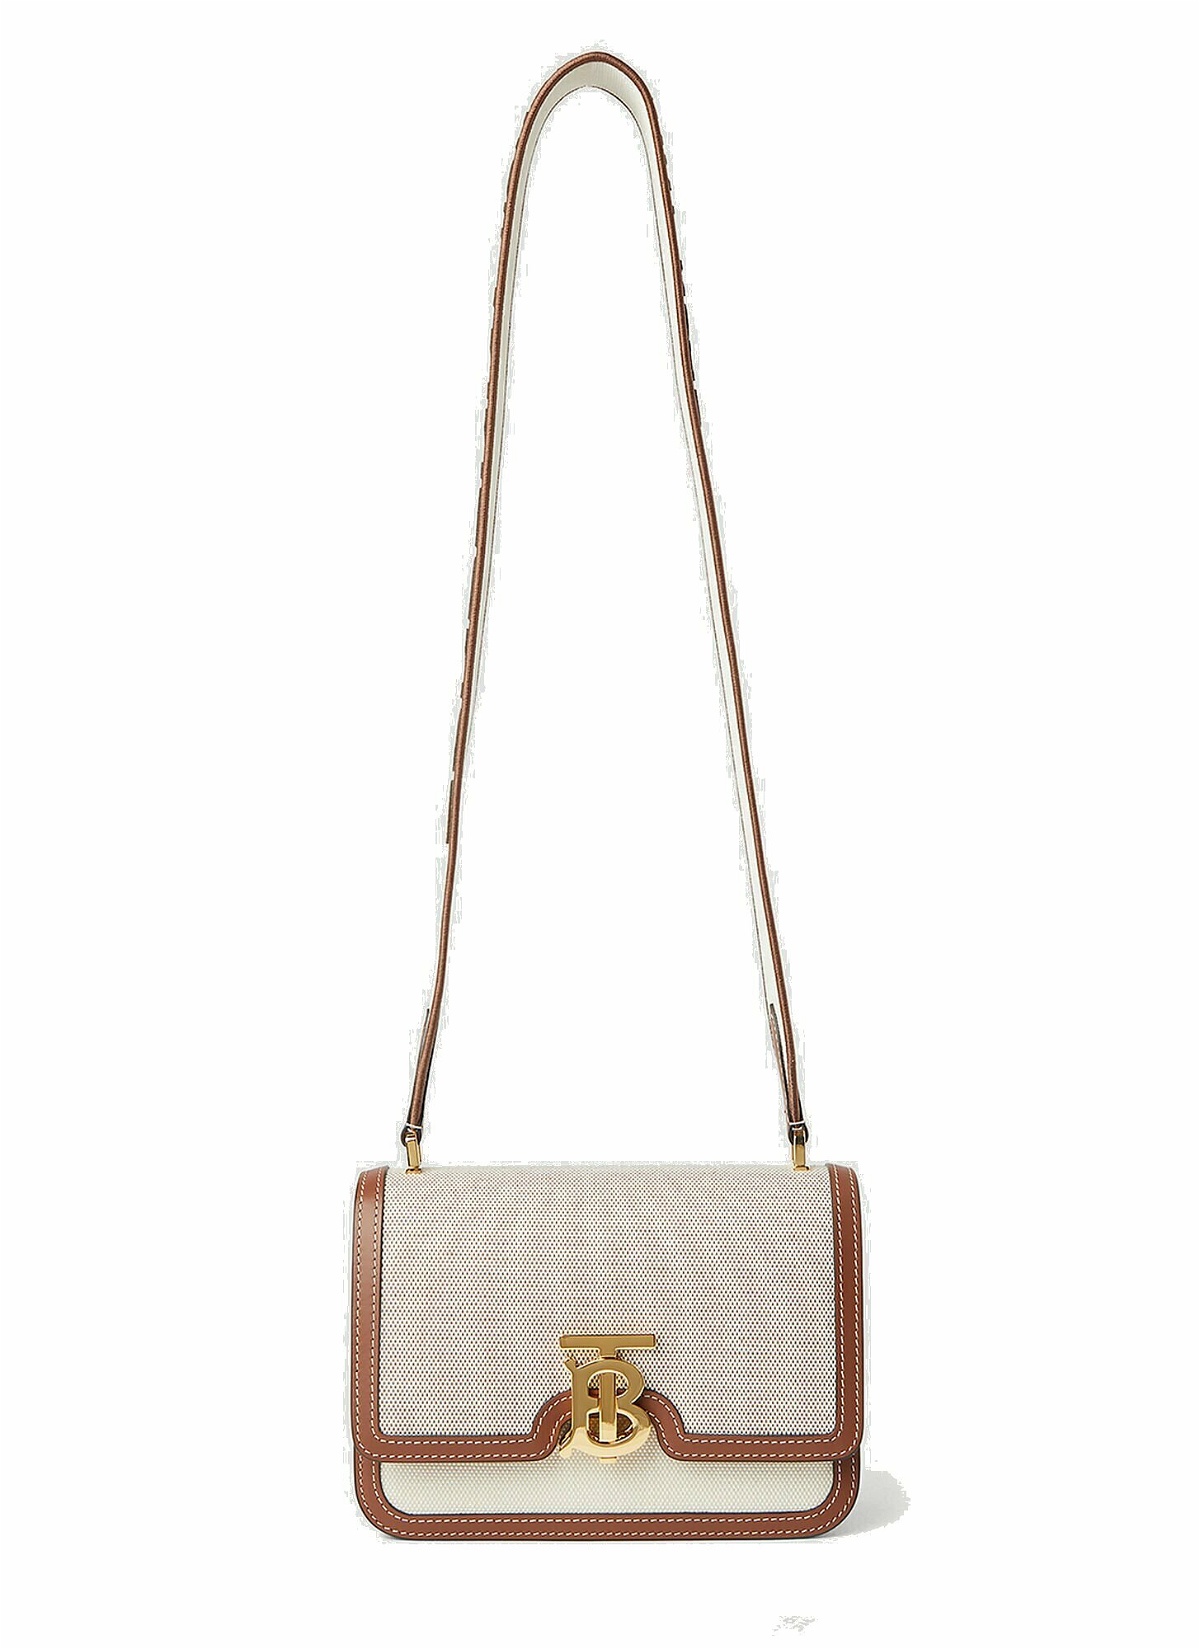 Photo: TB Small Shoulder Bag in Beige